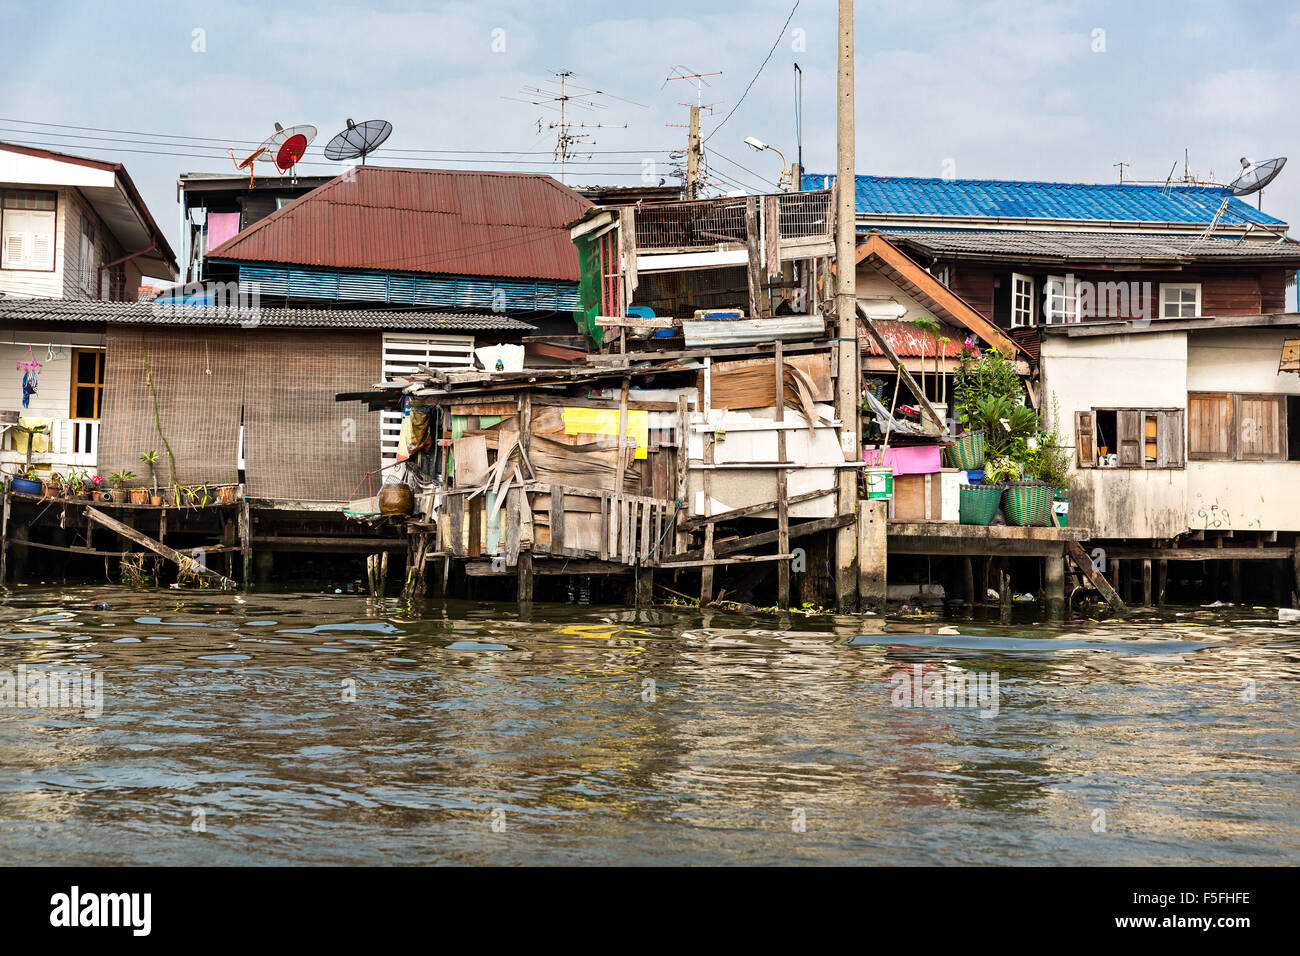 Shanty-town in Thailand Stock Photo